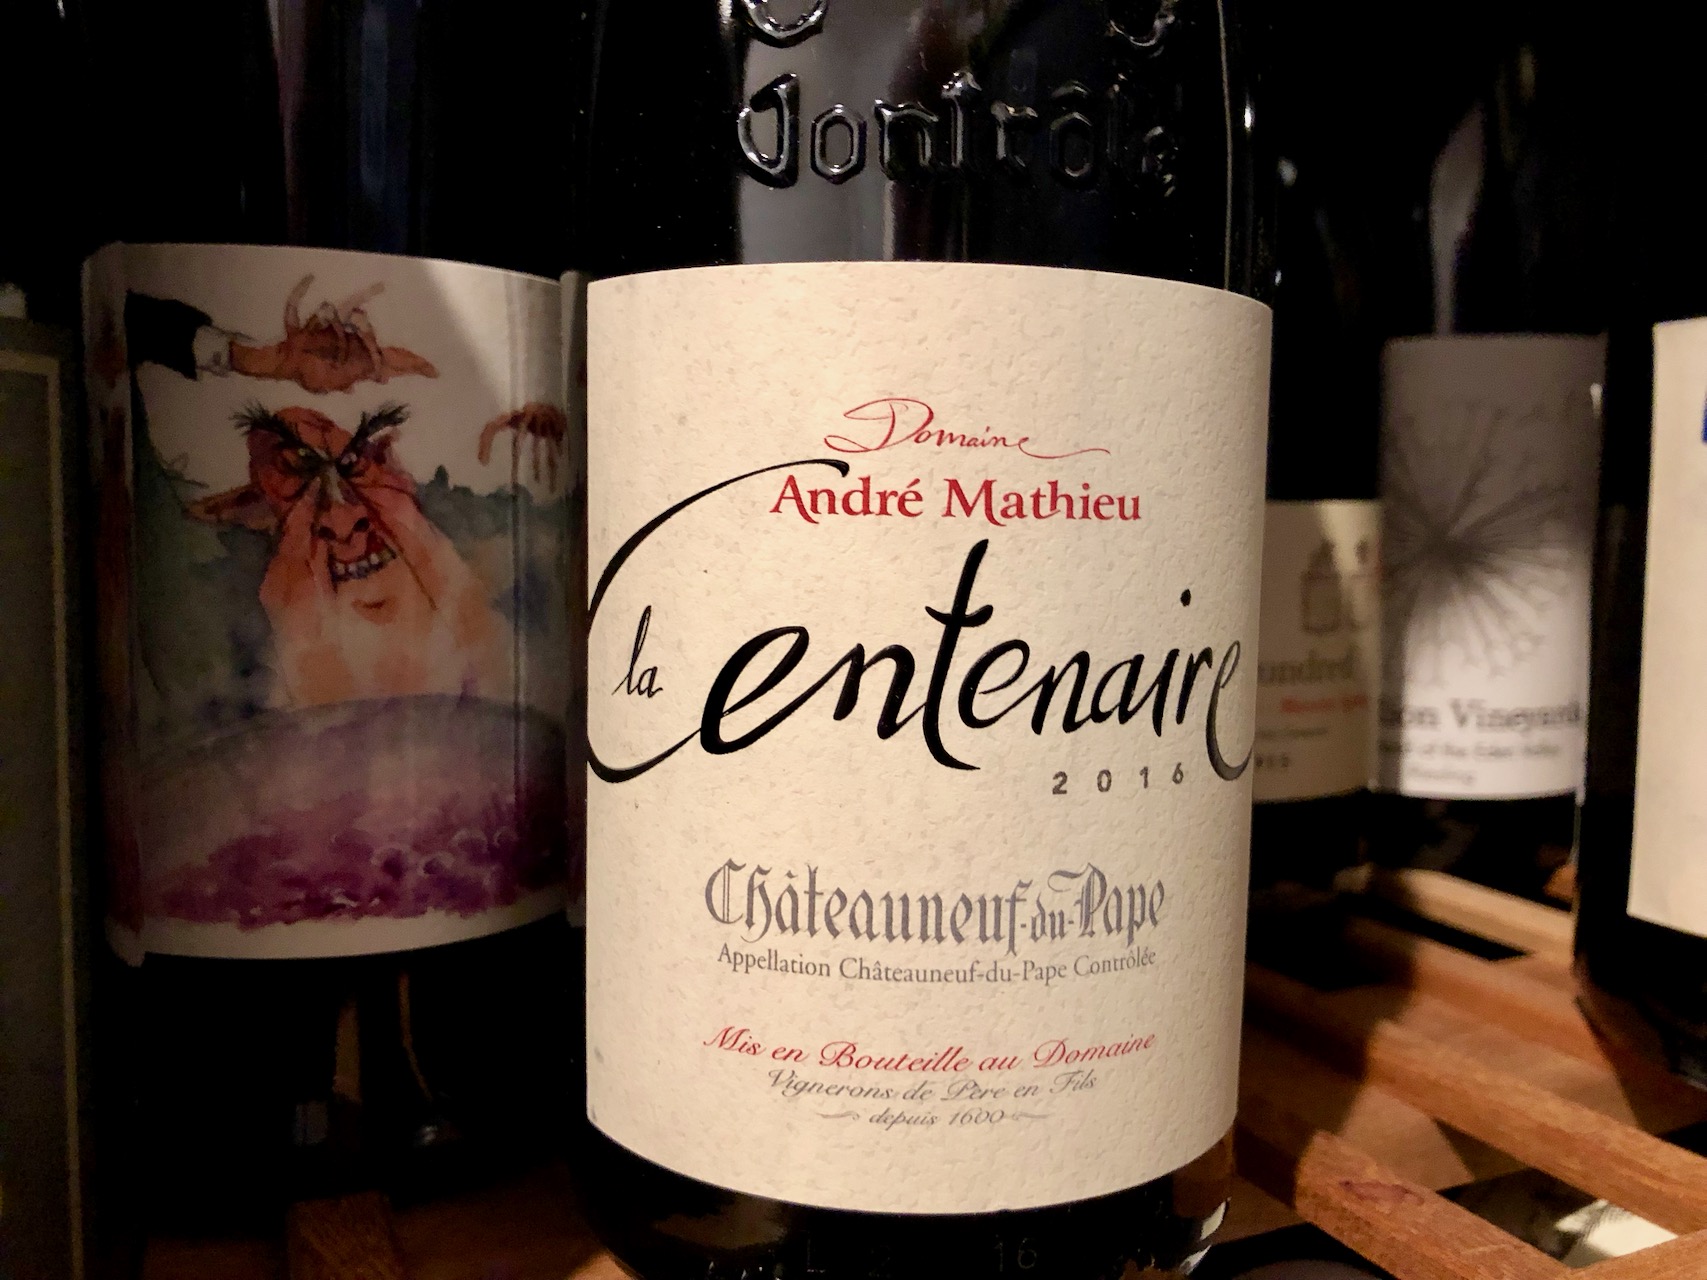 High Alcohol Red Wines Iii Domaine Andre Mathieu La Centenaire Chateauneuf Du Pape 16 Screwcapped